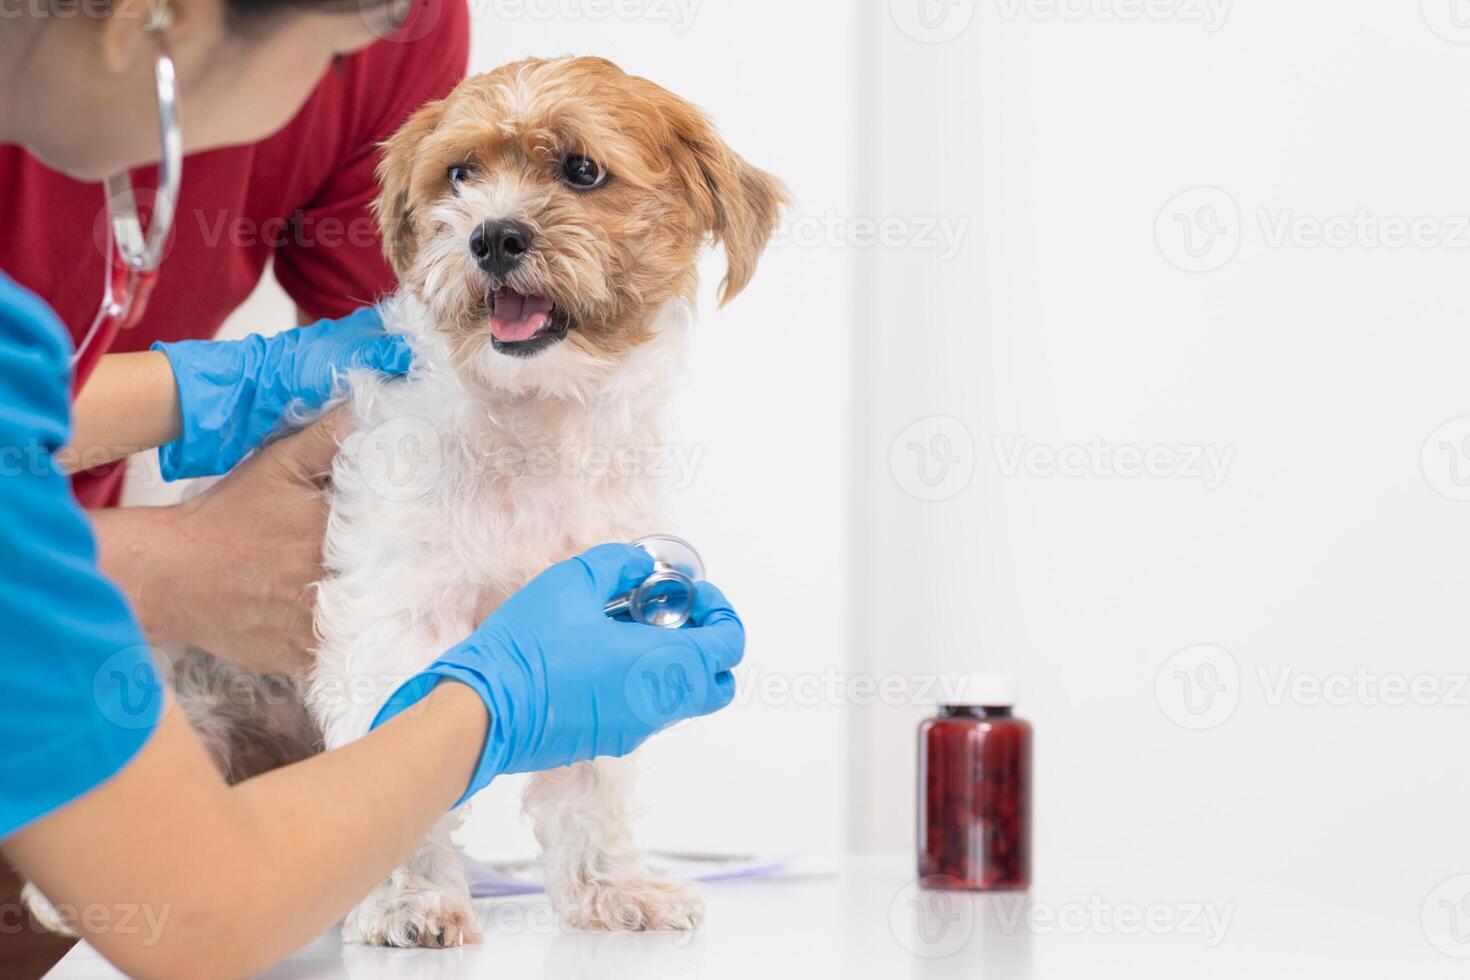 Veterinarians are performing annual check ups on dogs to look for possible illnesses and treat them quickly to ensure the pet's health. veterinarian is examining dog in veterinary clinic for treatment photo